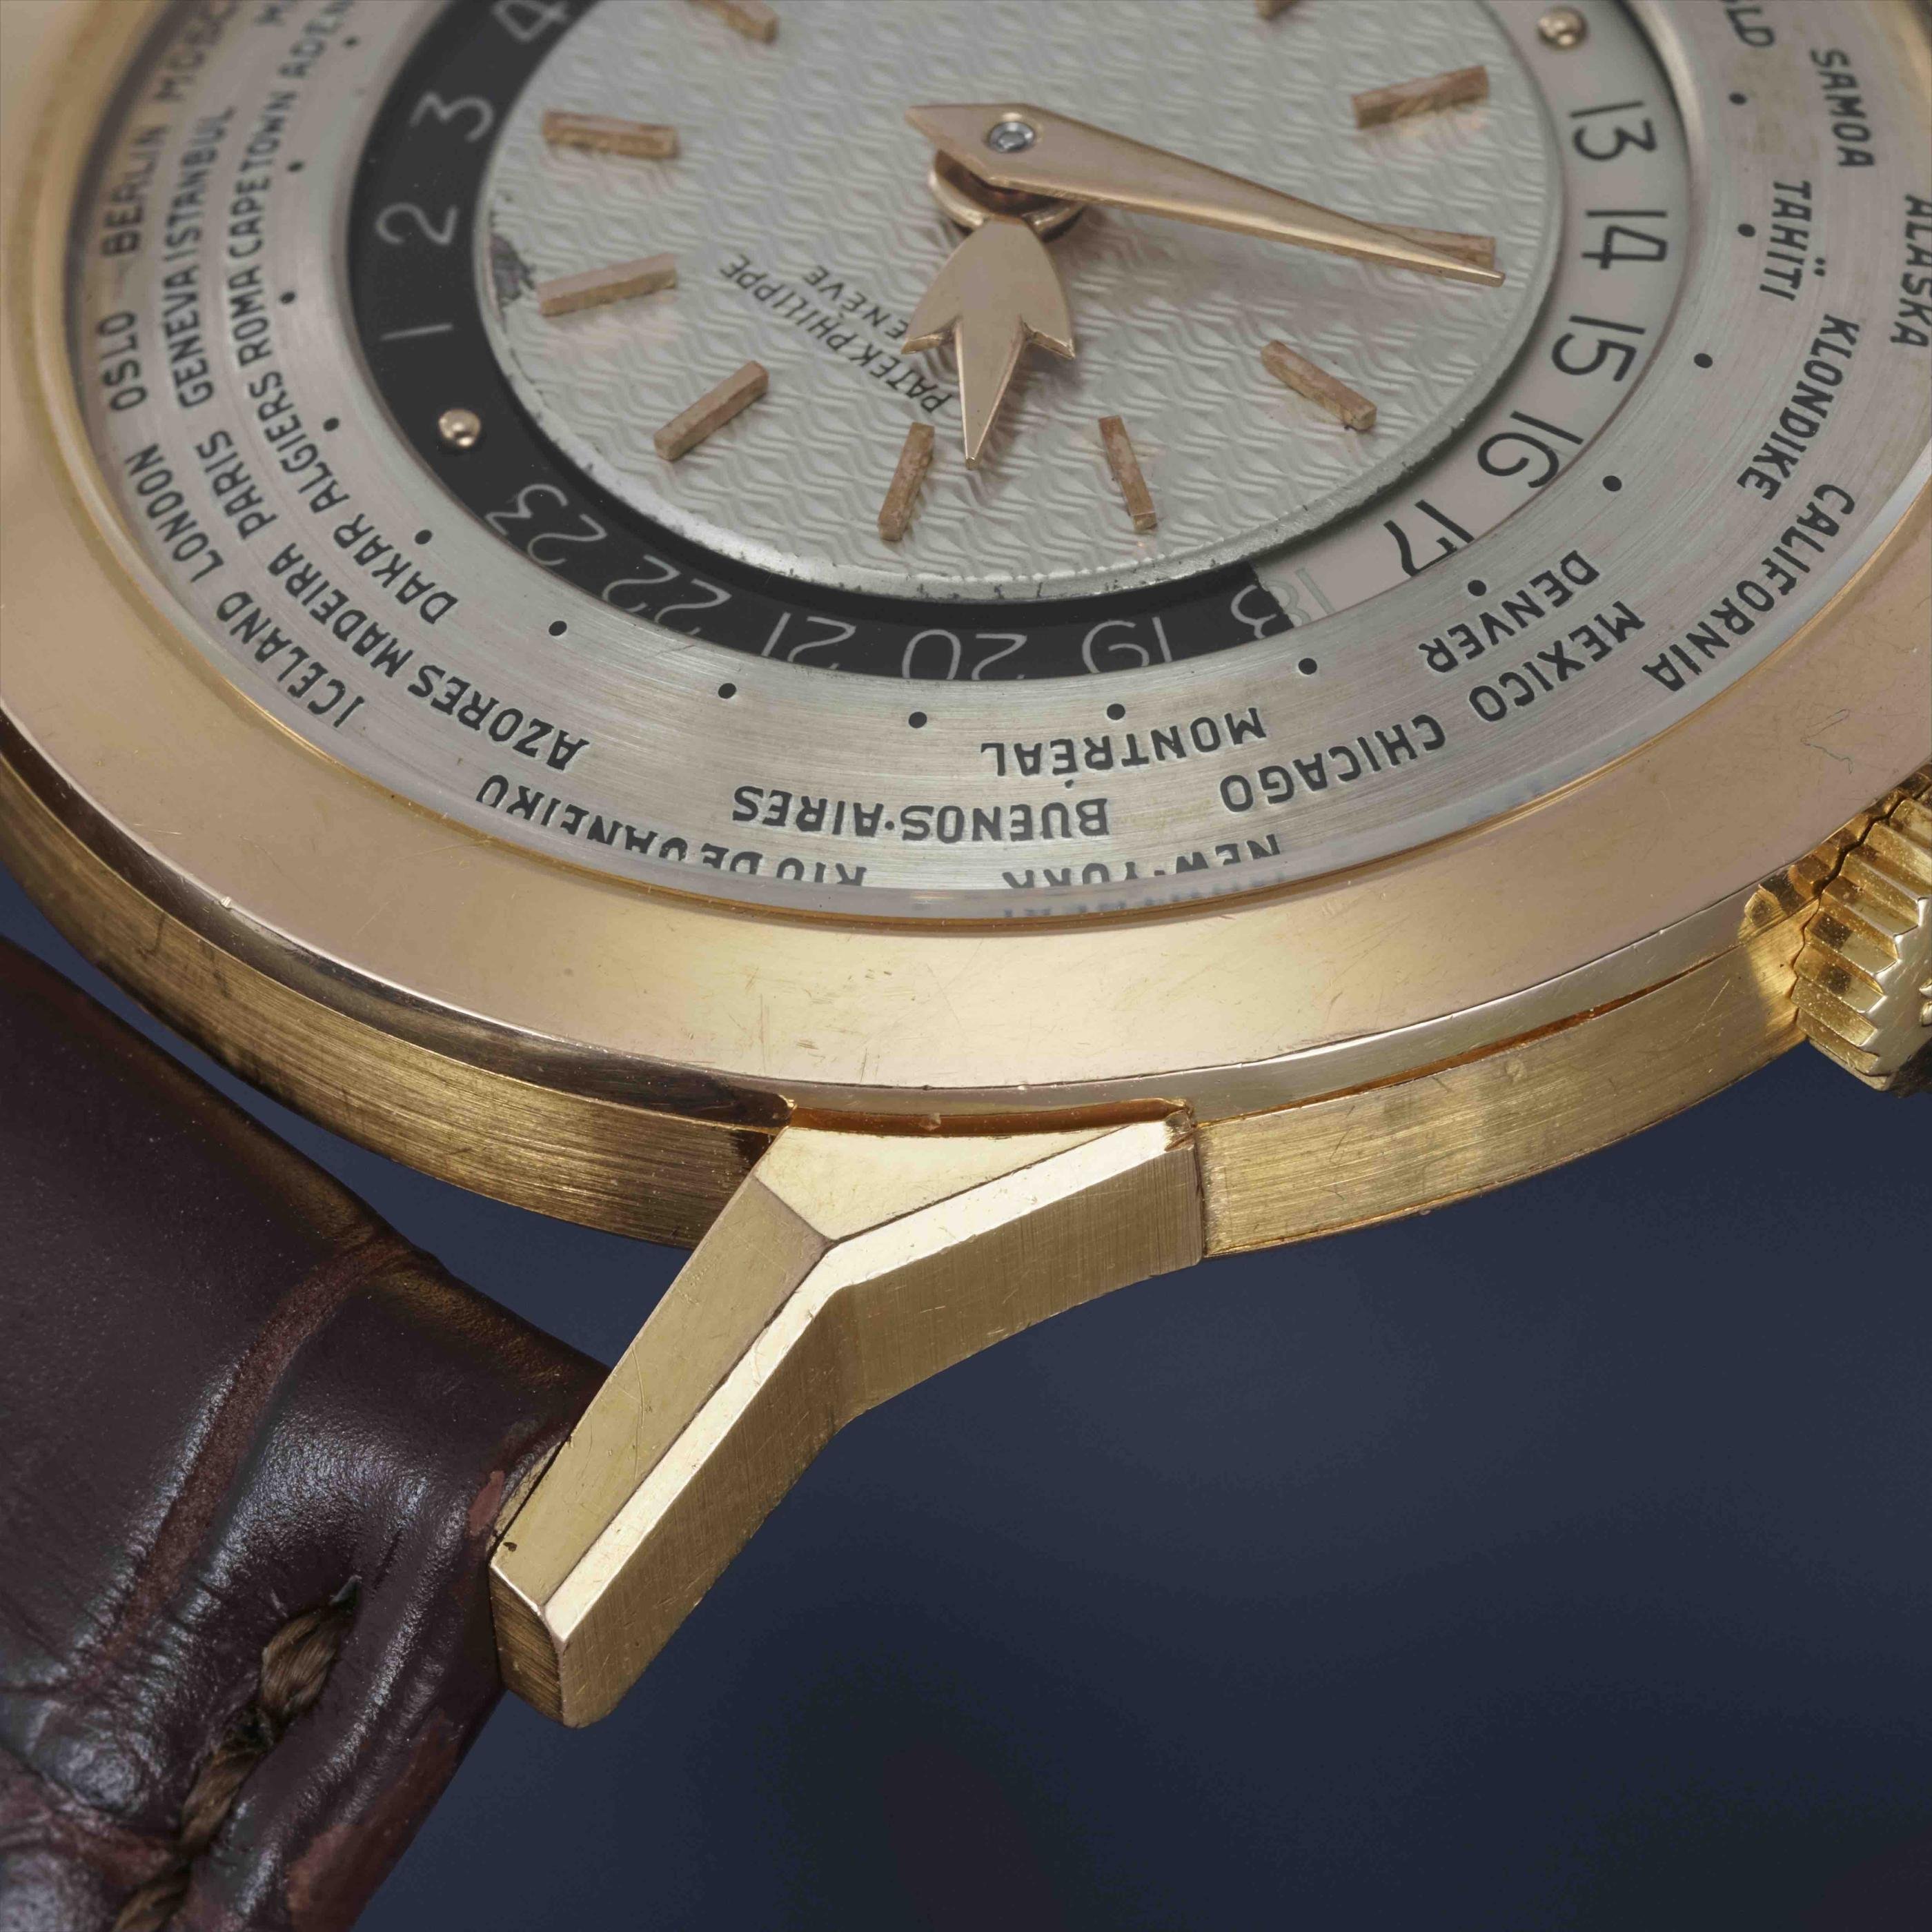 An extremely rare Patek Philippe to be auctioned in Geneva